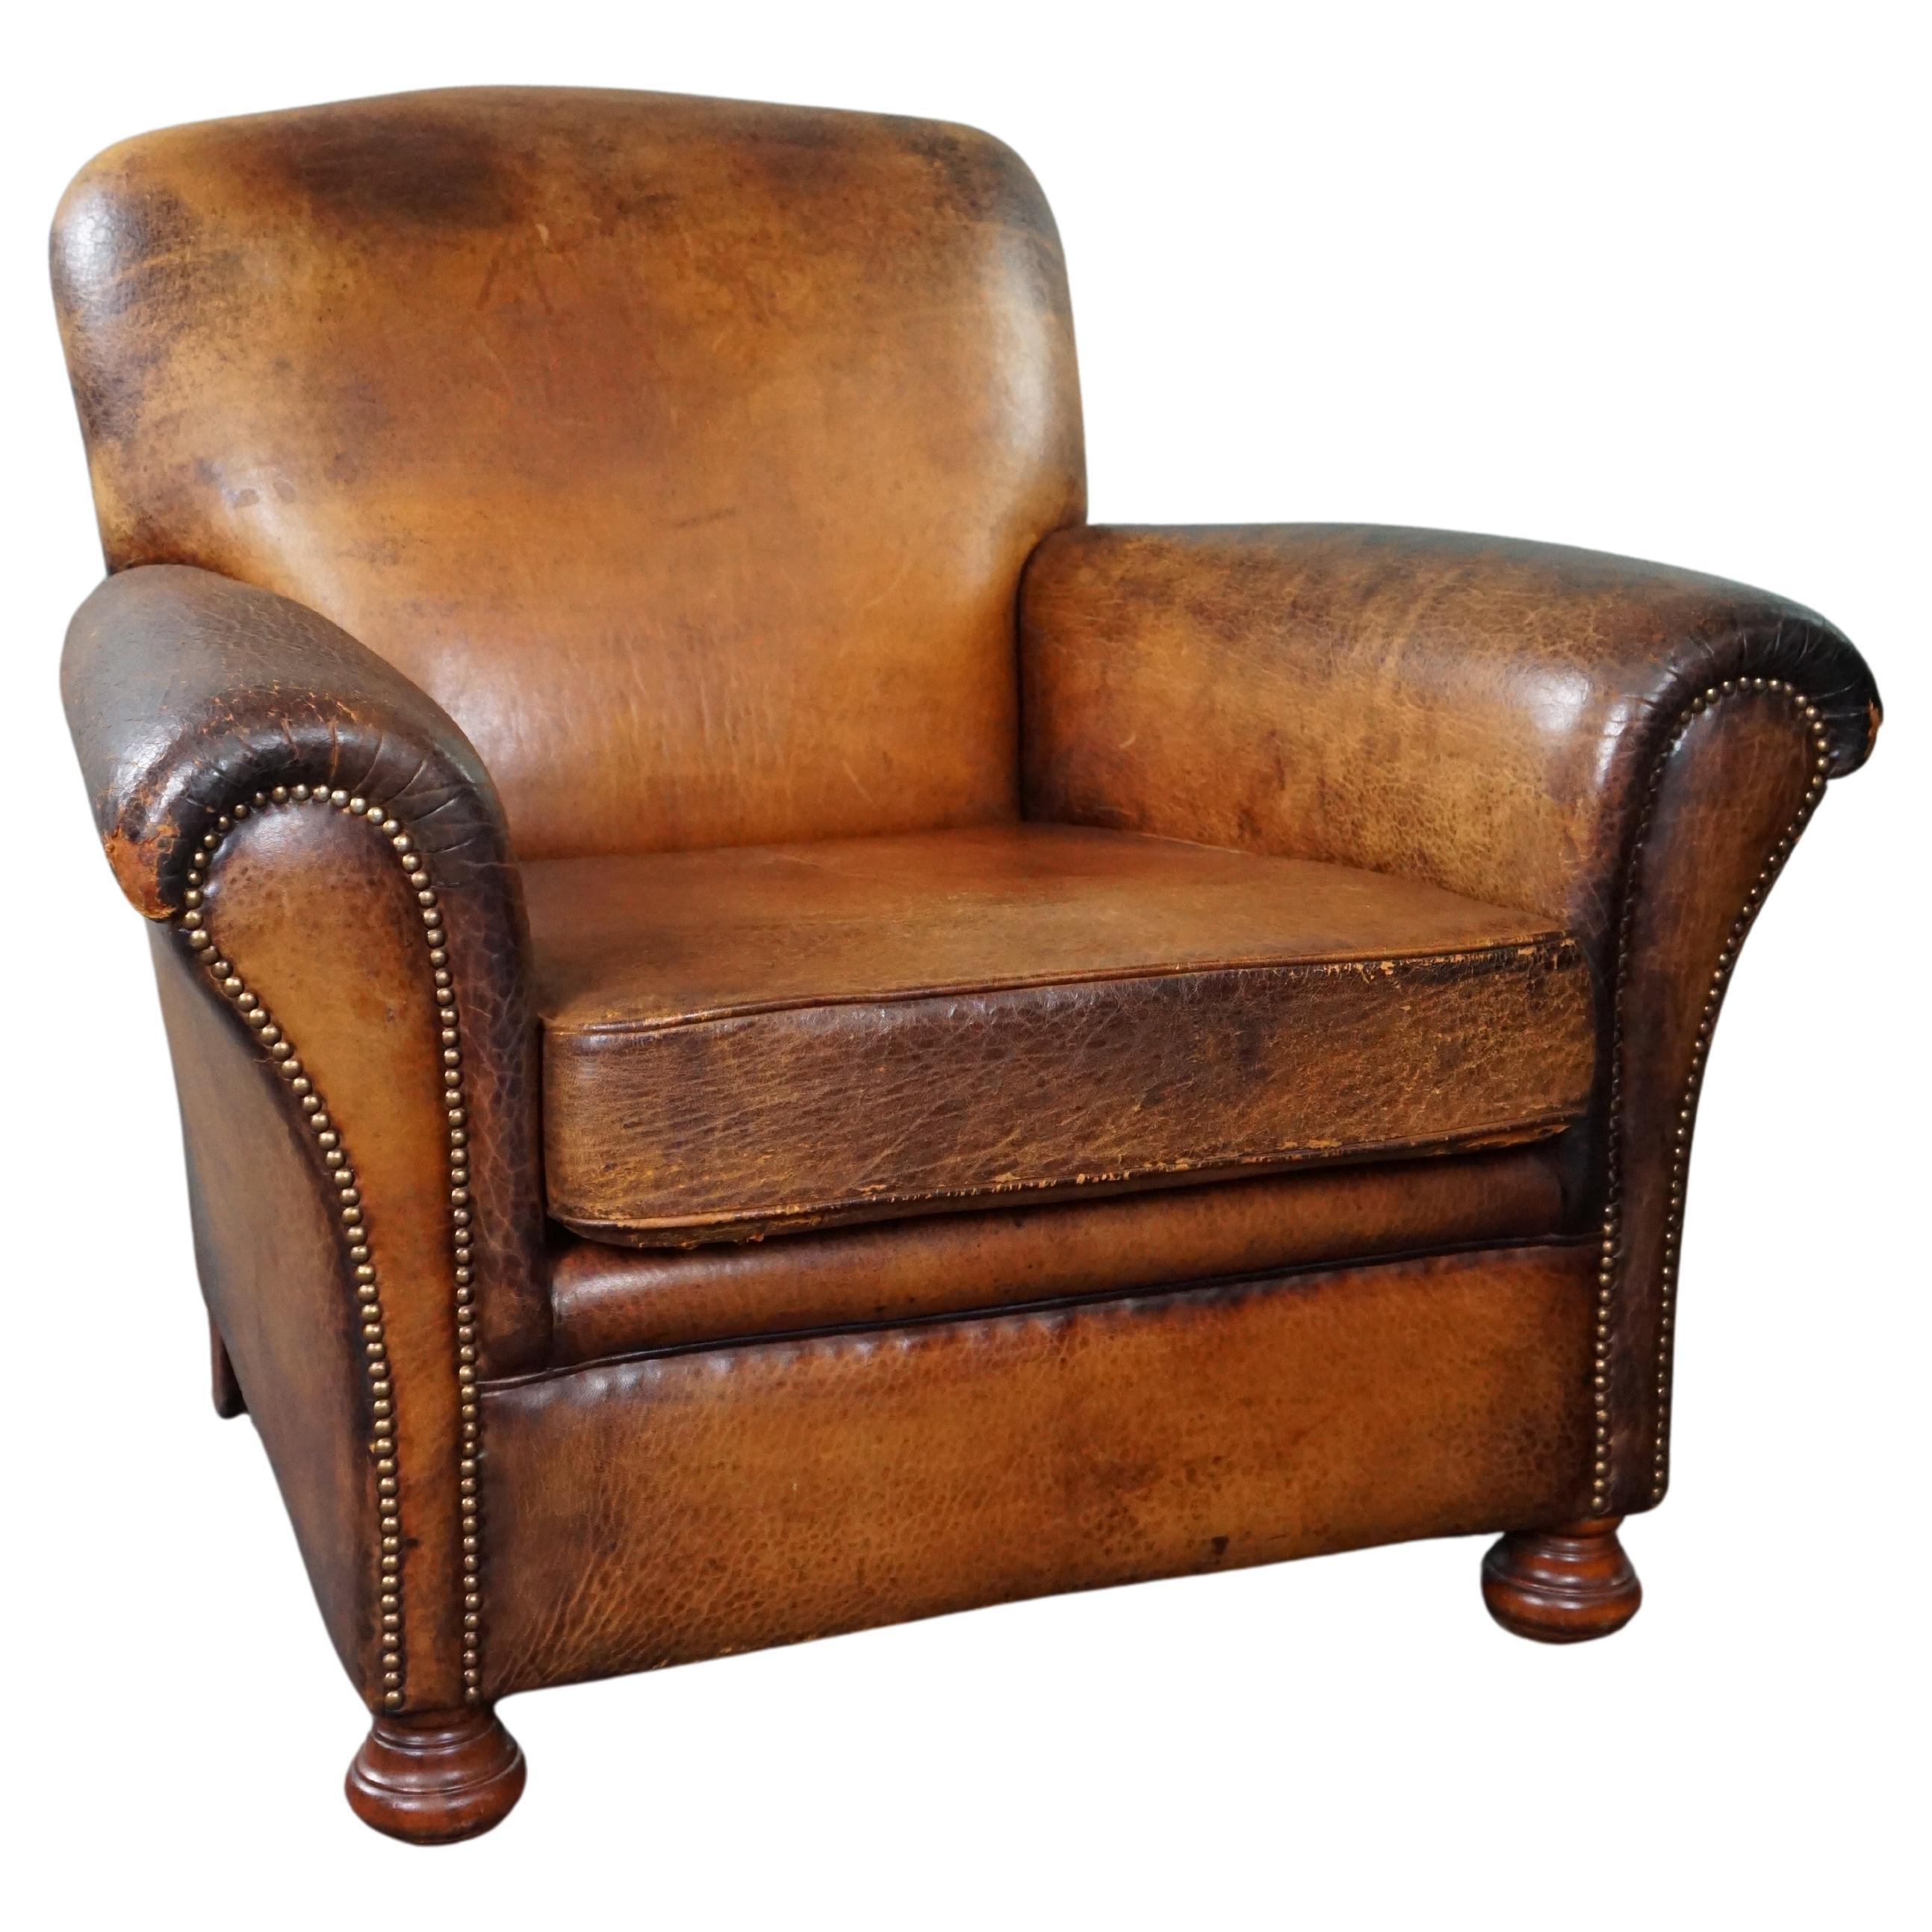 Characteristic sheep leather armchair with amazing colors For Sale